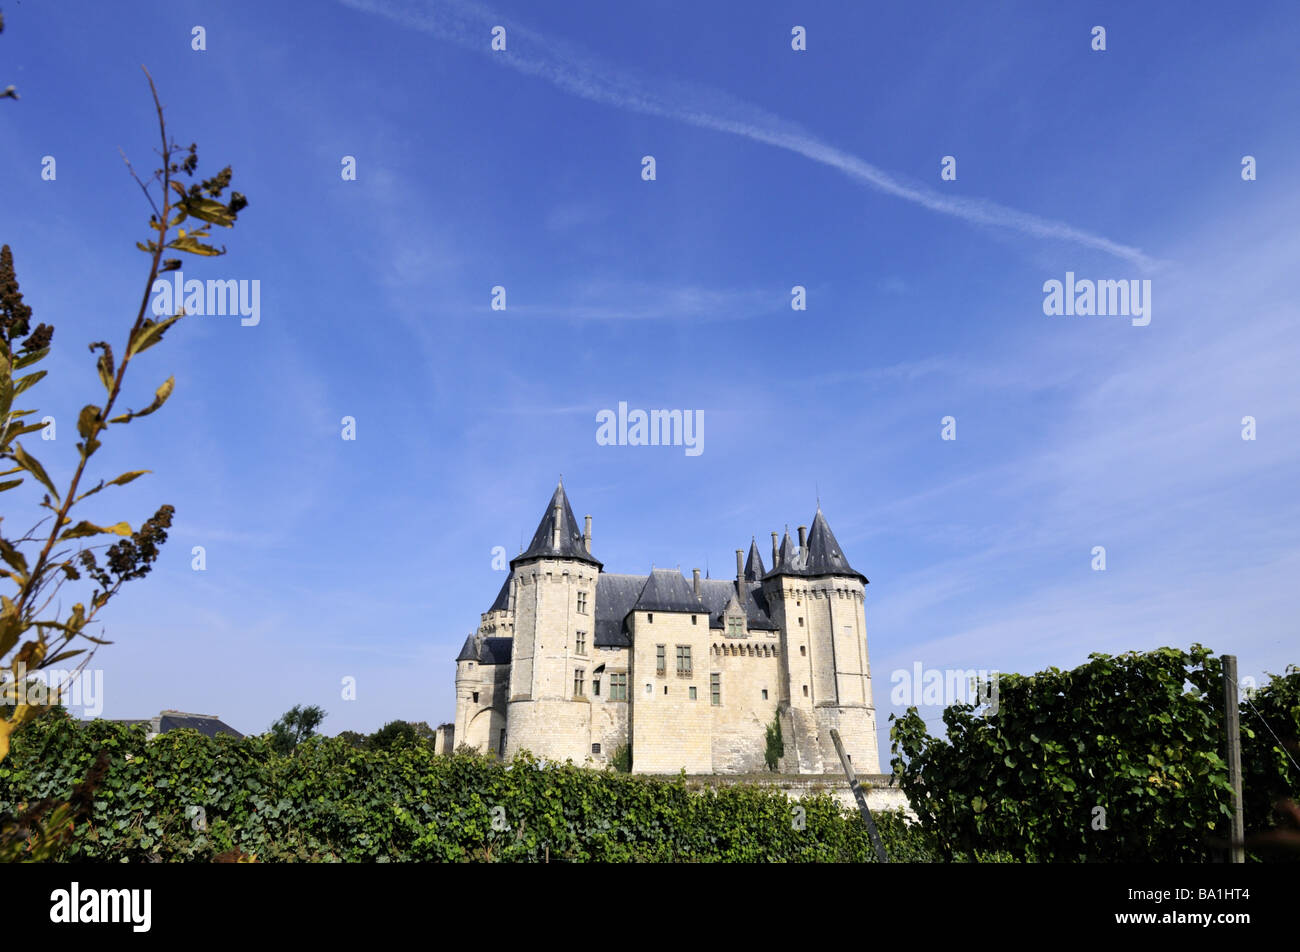 Saumur castle in the French Loire valley was built in the 10th century. It was depicted in the medieval Book of Hours. Stock Photo